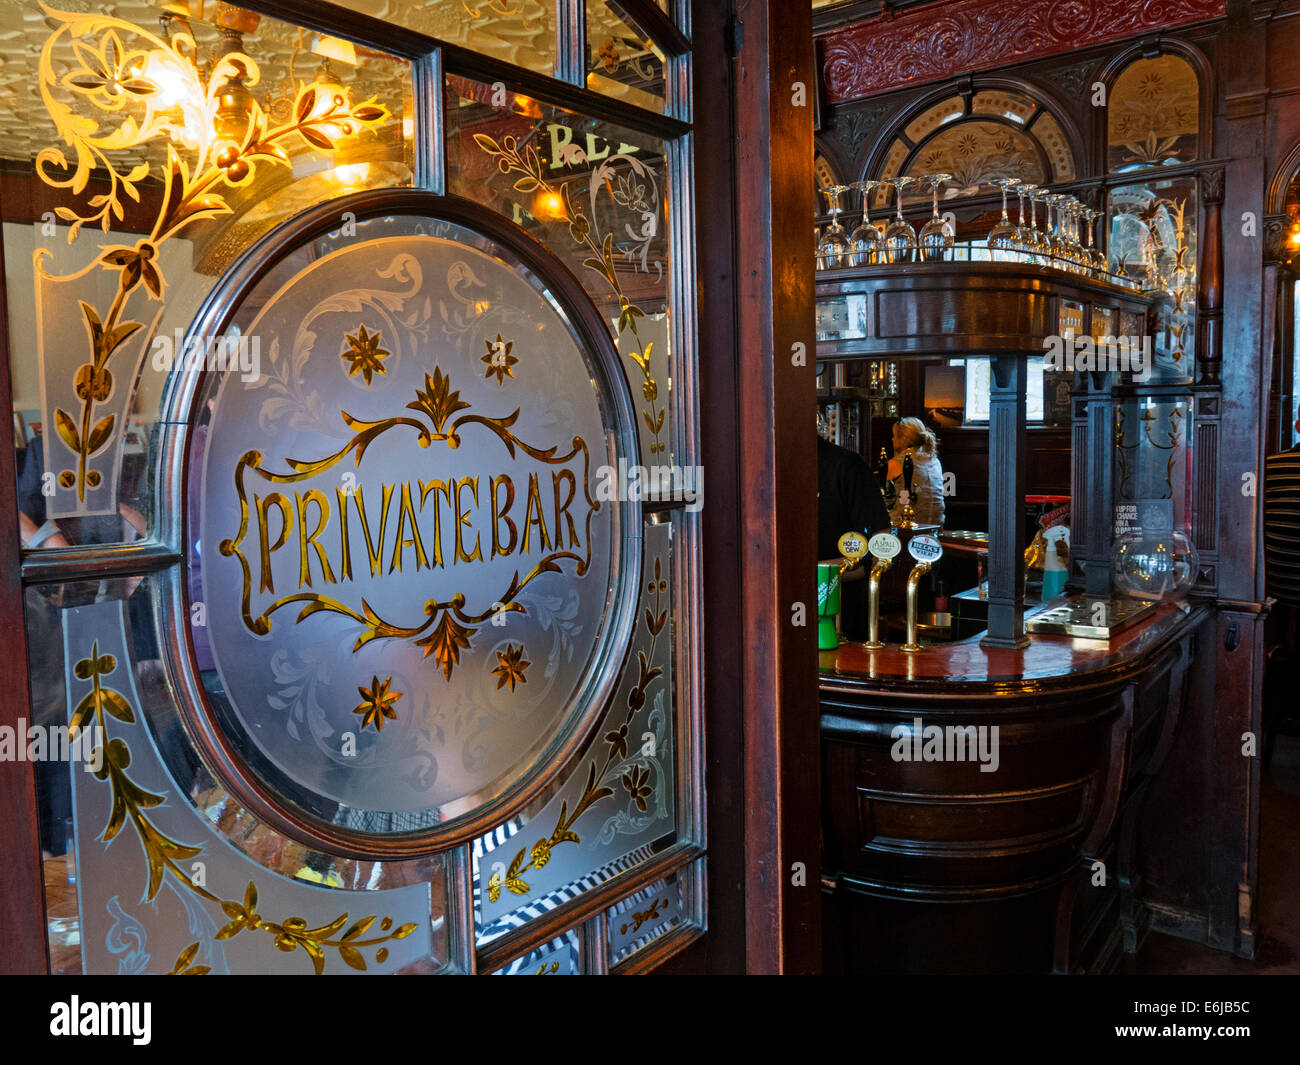 Private Bar im traditionellen Londoner Pub, Red Lion Jermyn St Mayfair (ab Piccadilly) England UK Stockfoto